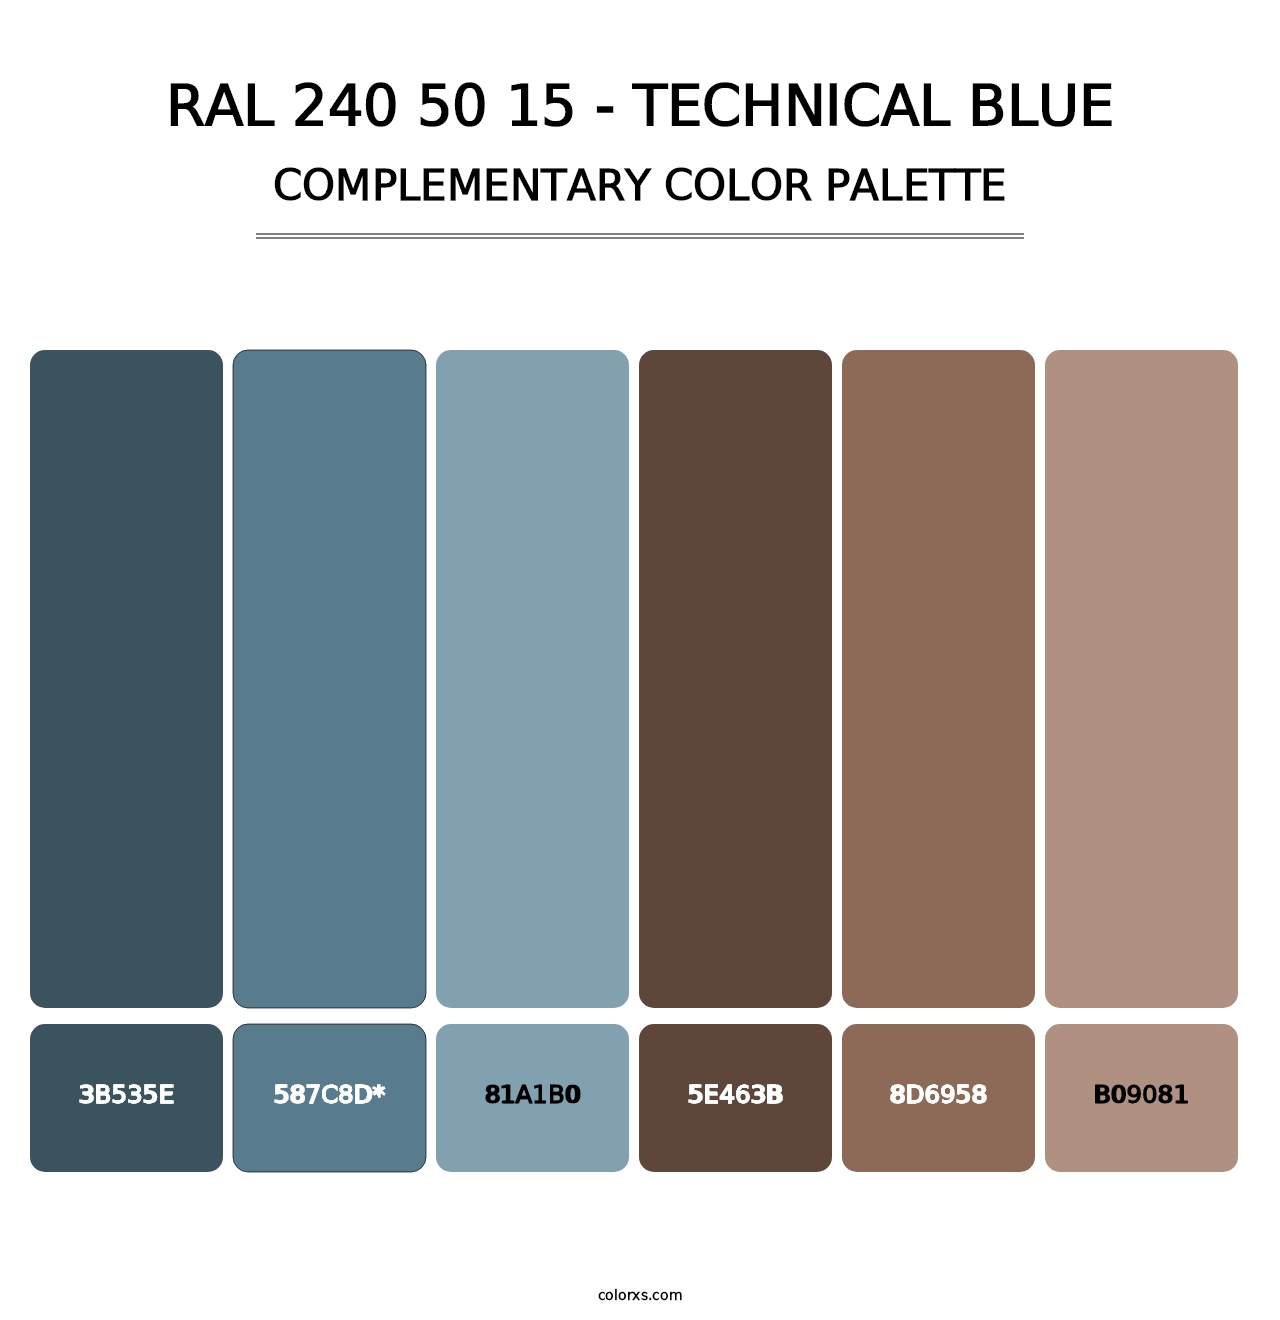 RAL 240 50 15 - Technical Blue - Complementary Color Palette